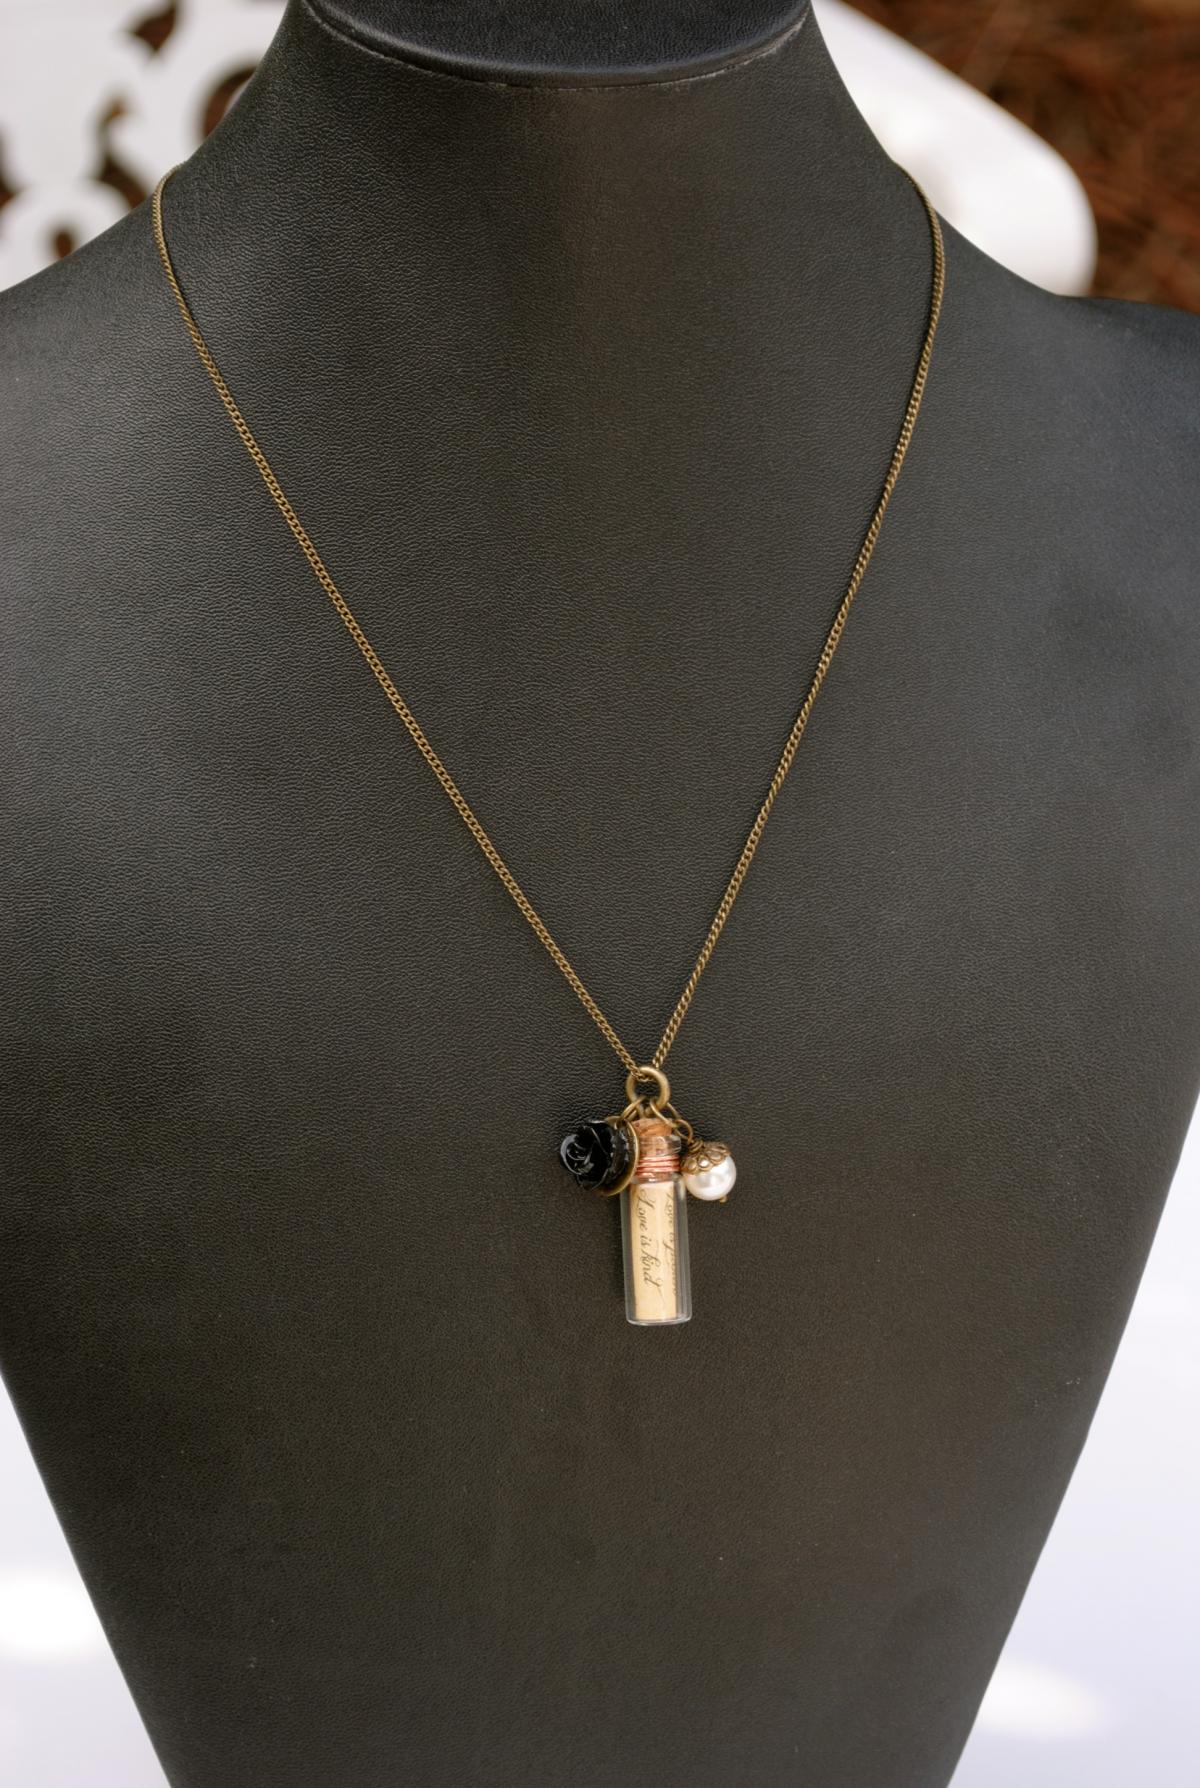 Personalized Message In A Bottle Necklace-friendship-bridesmaids Gifts